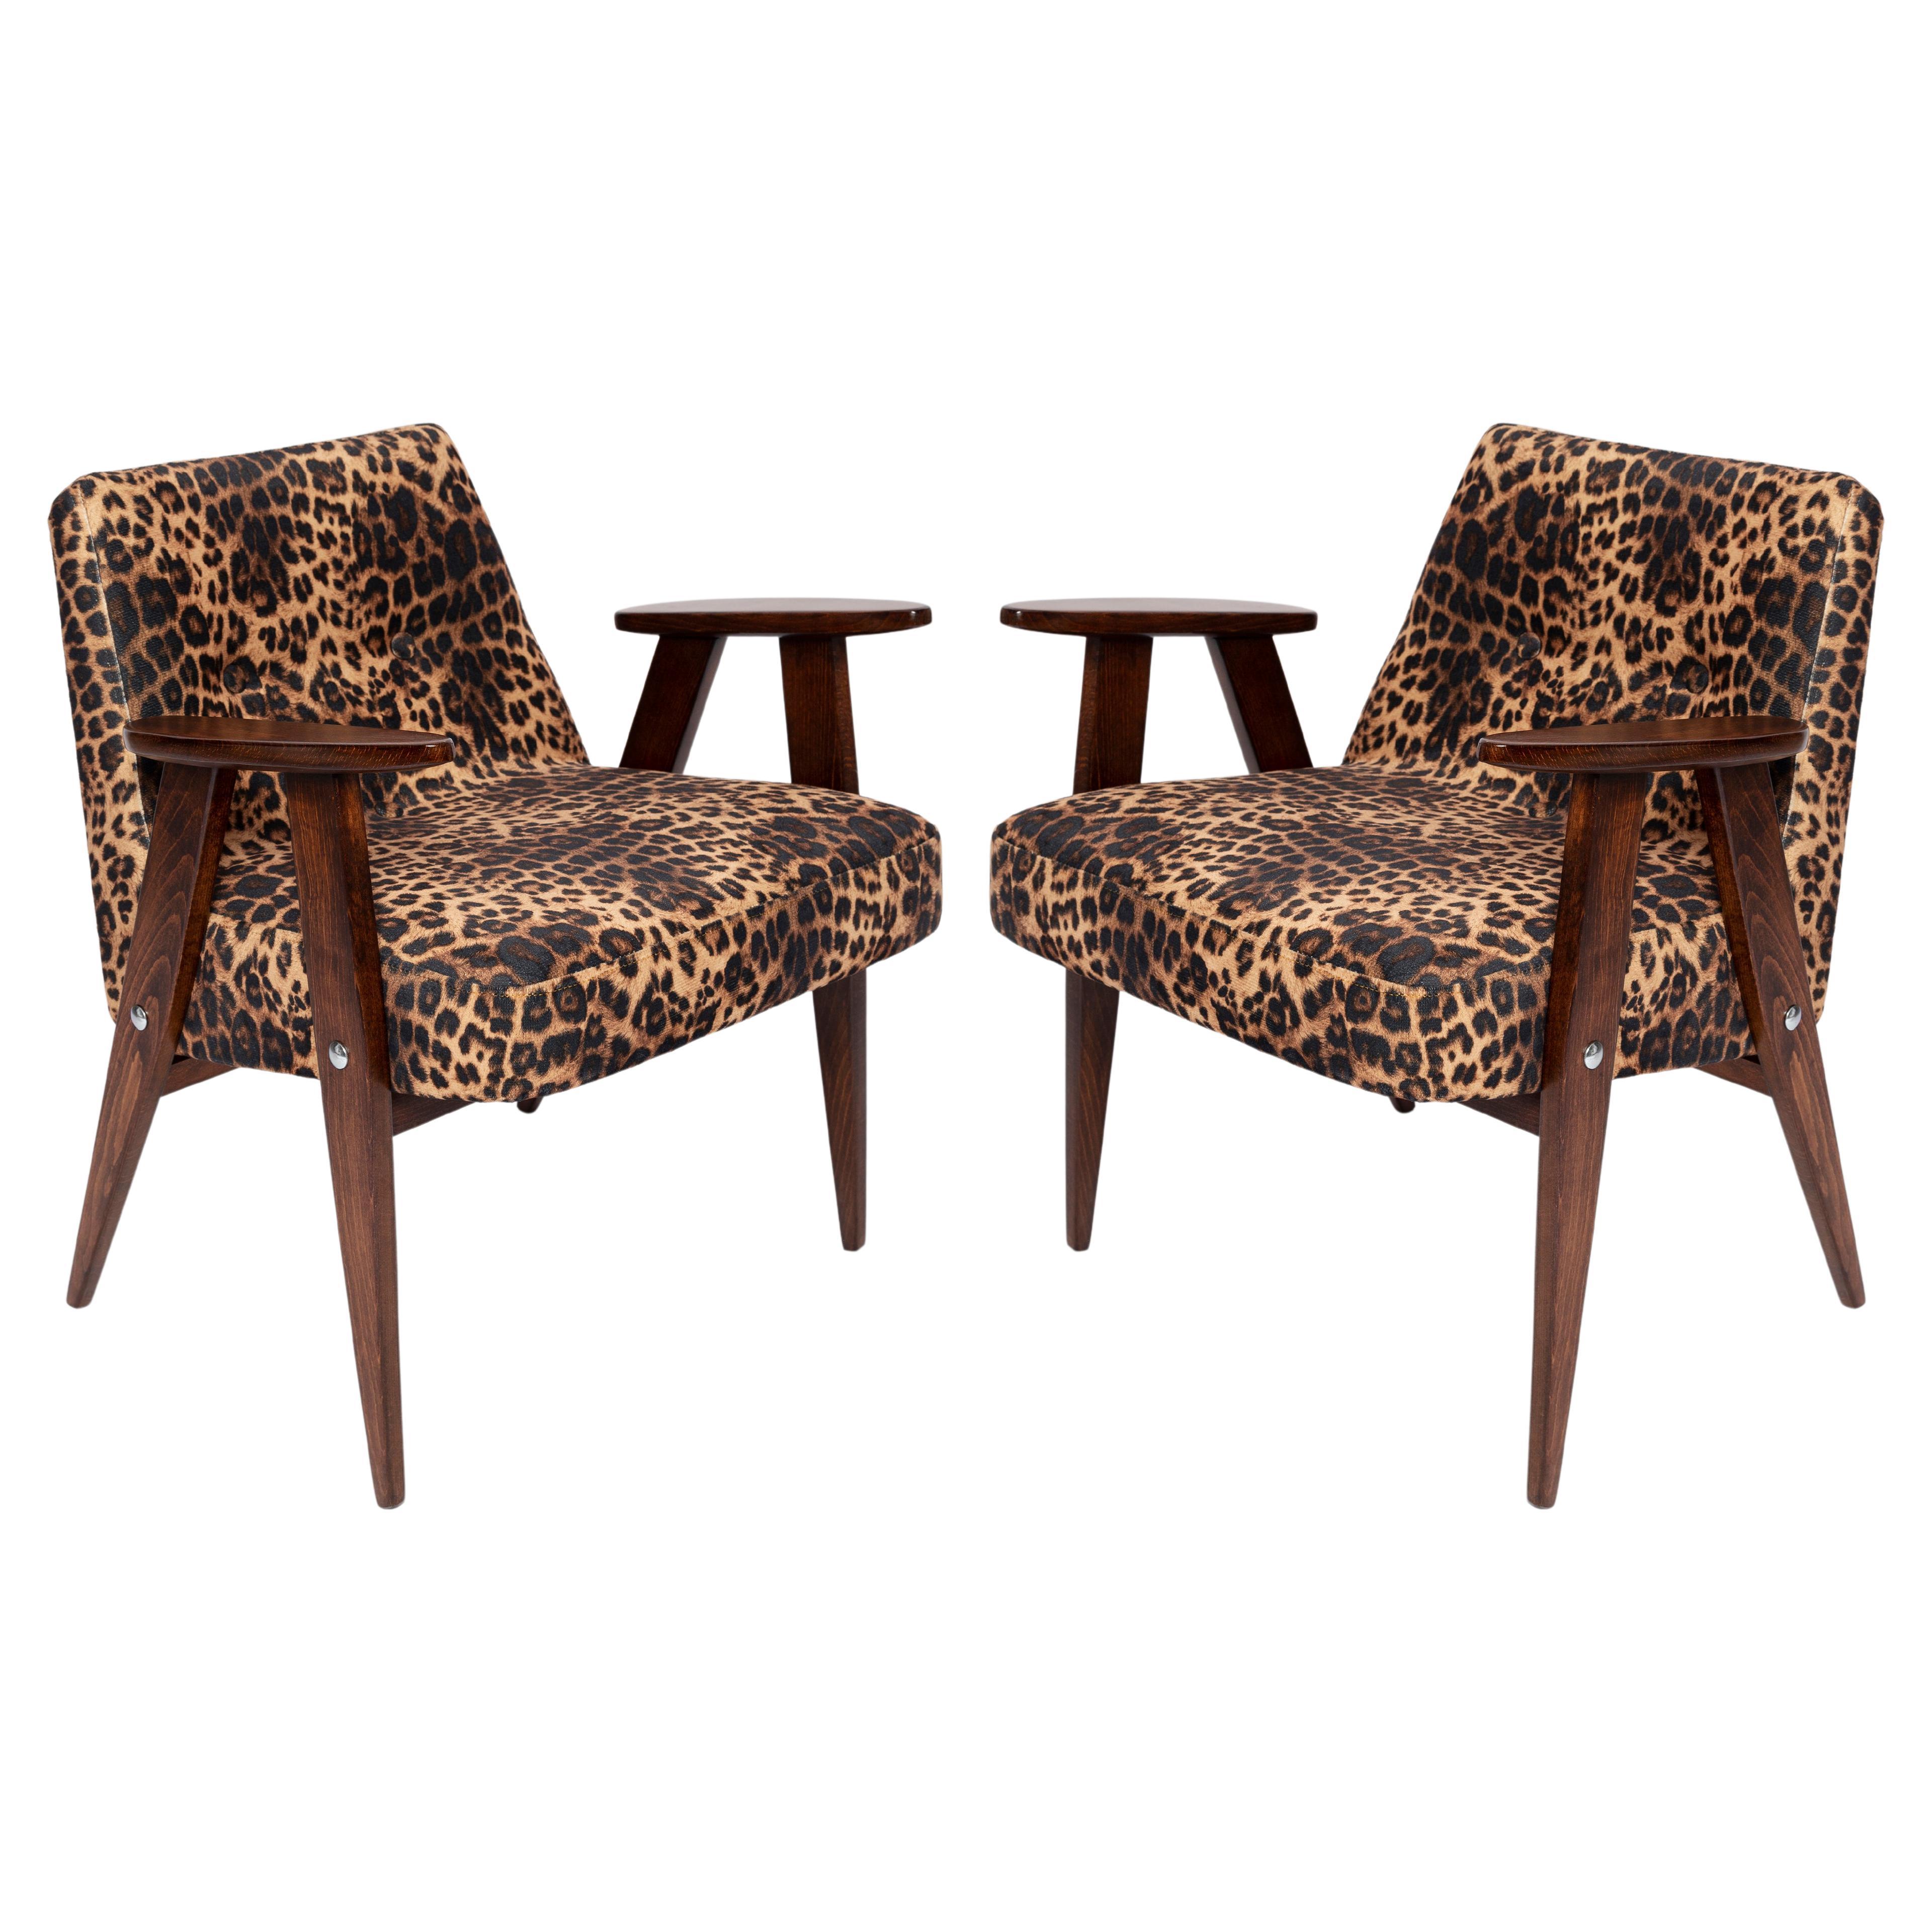 Two Midcentury 366 Armchairs in Leopard Print Velvet, Jozef Chierowski, 1960s